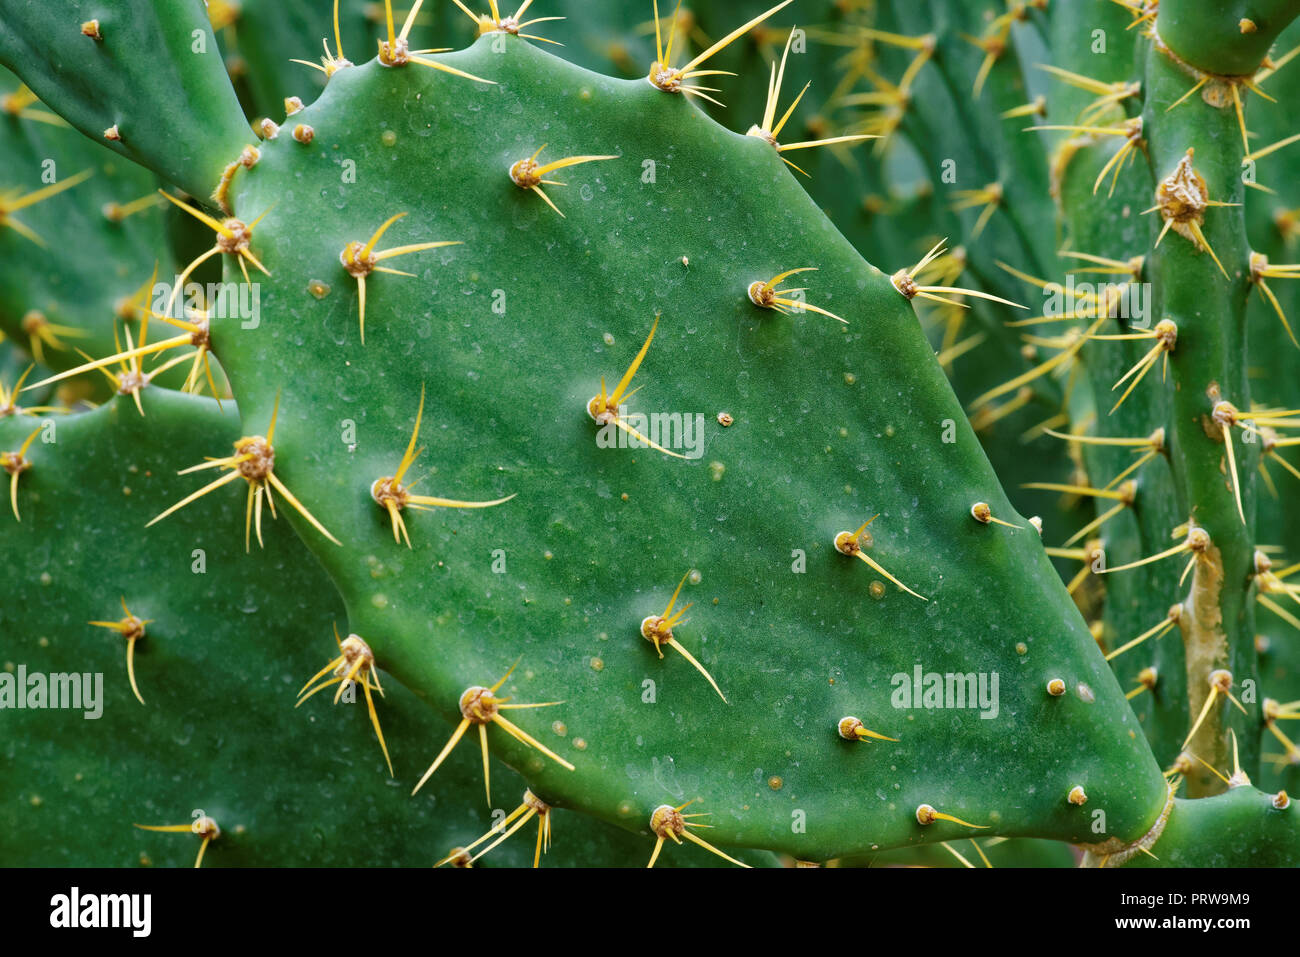 Opuntia dillenii s a large sized species of cactus that is endemic in the subtropical and tropical coastal areas of the Americas and the Caribbean. Stock Photo